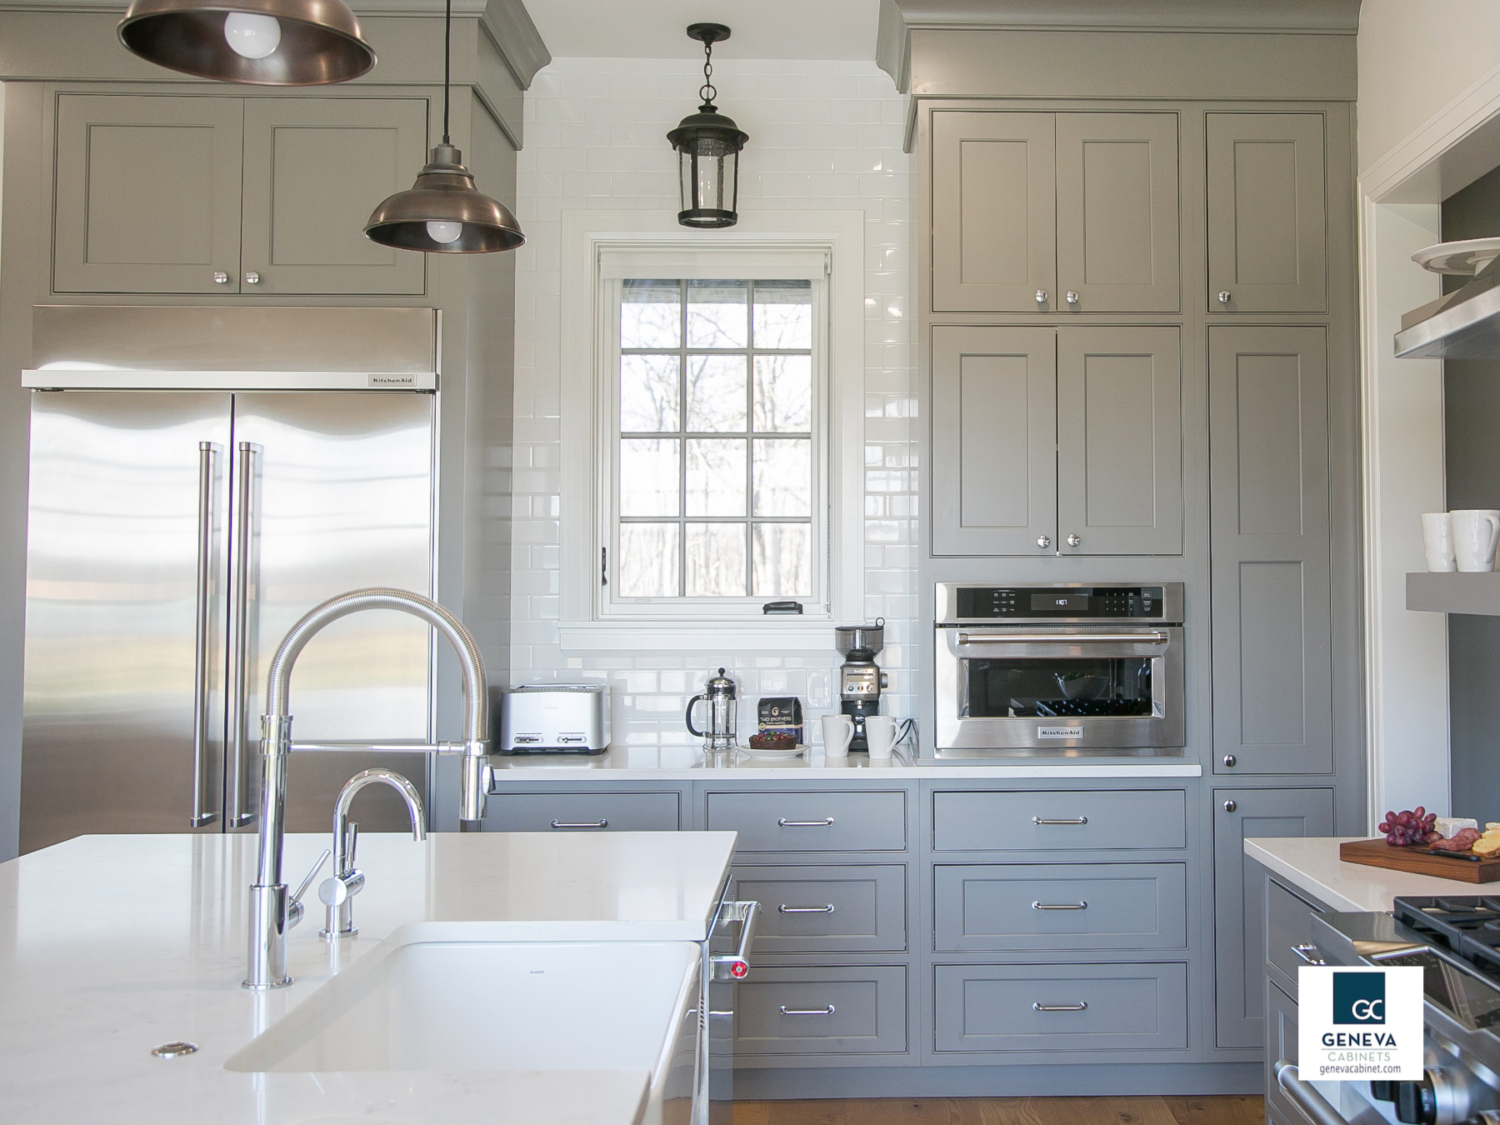 Remodeling 101 A Guide To The Only 6 Kitchen Cabinet Styles You